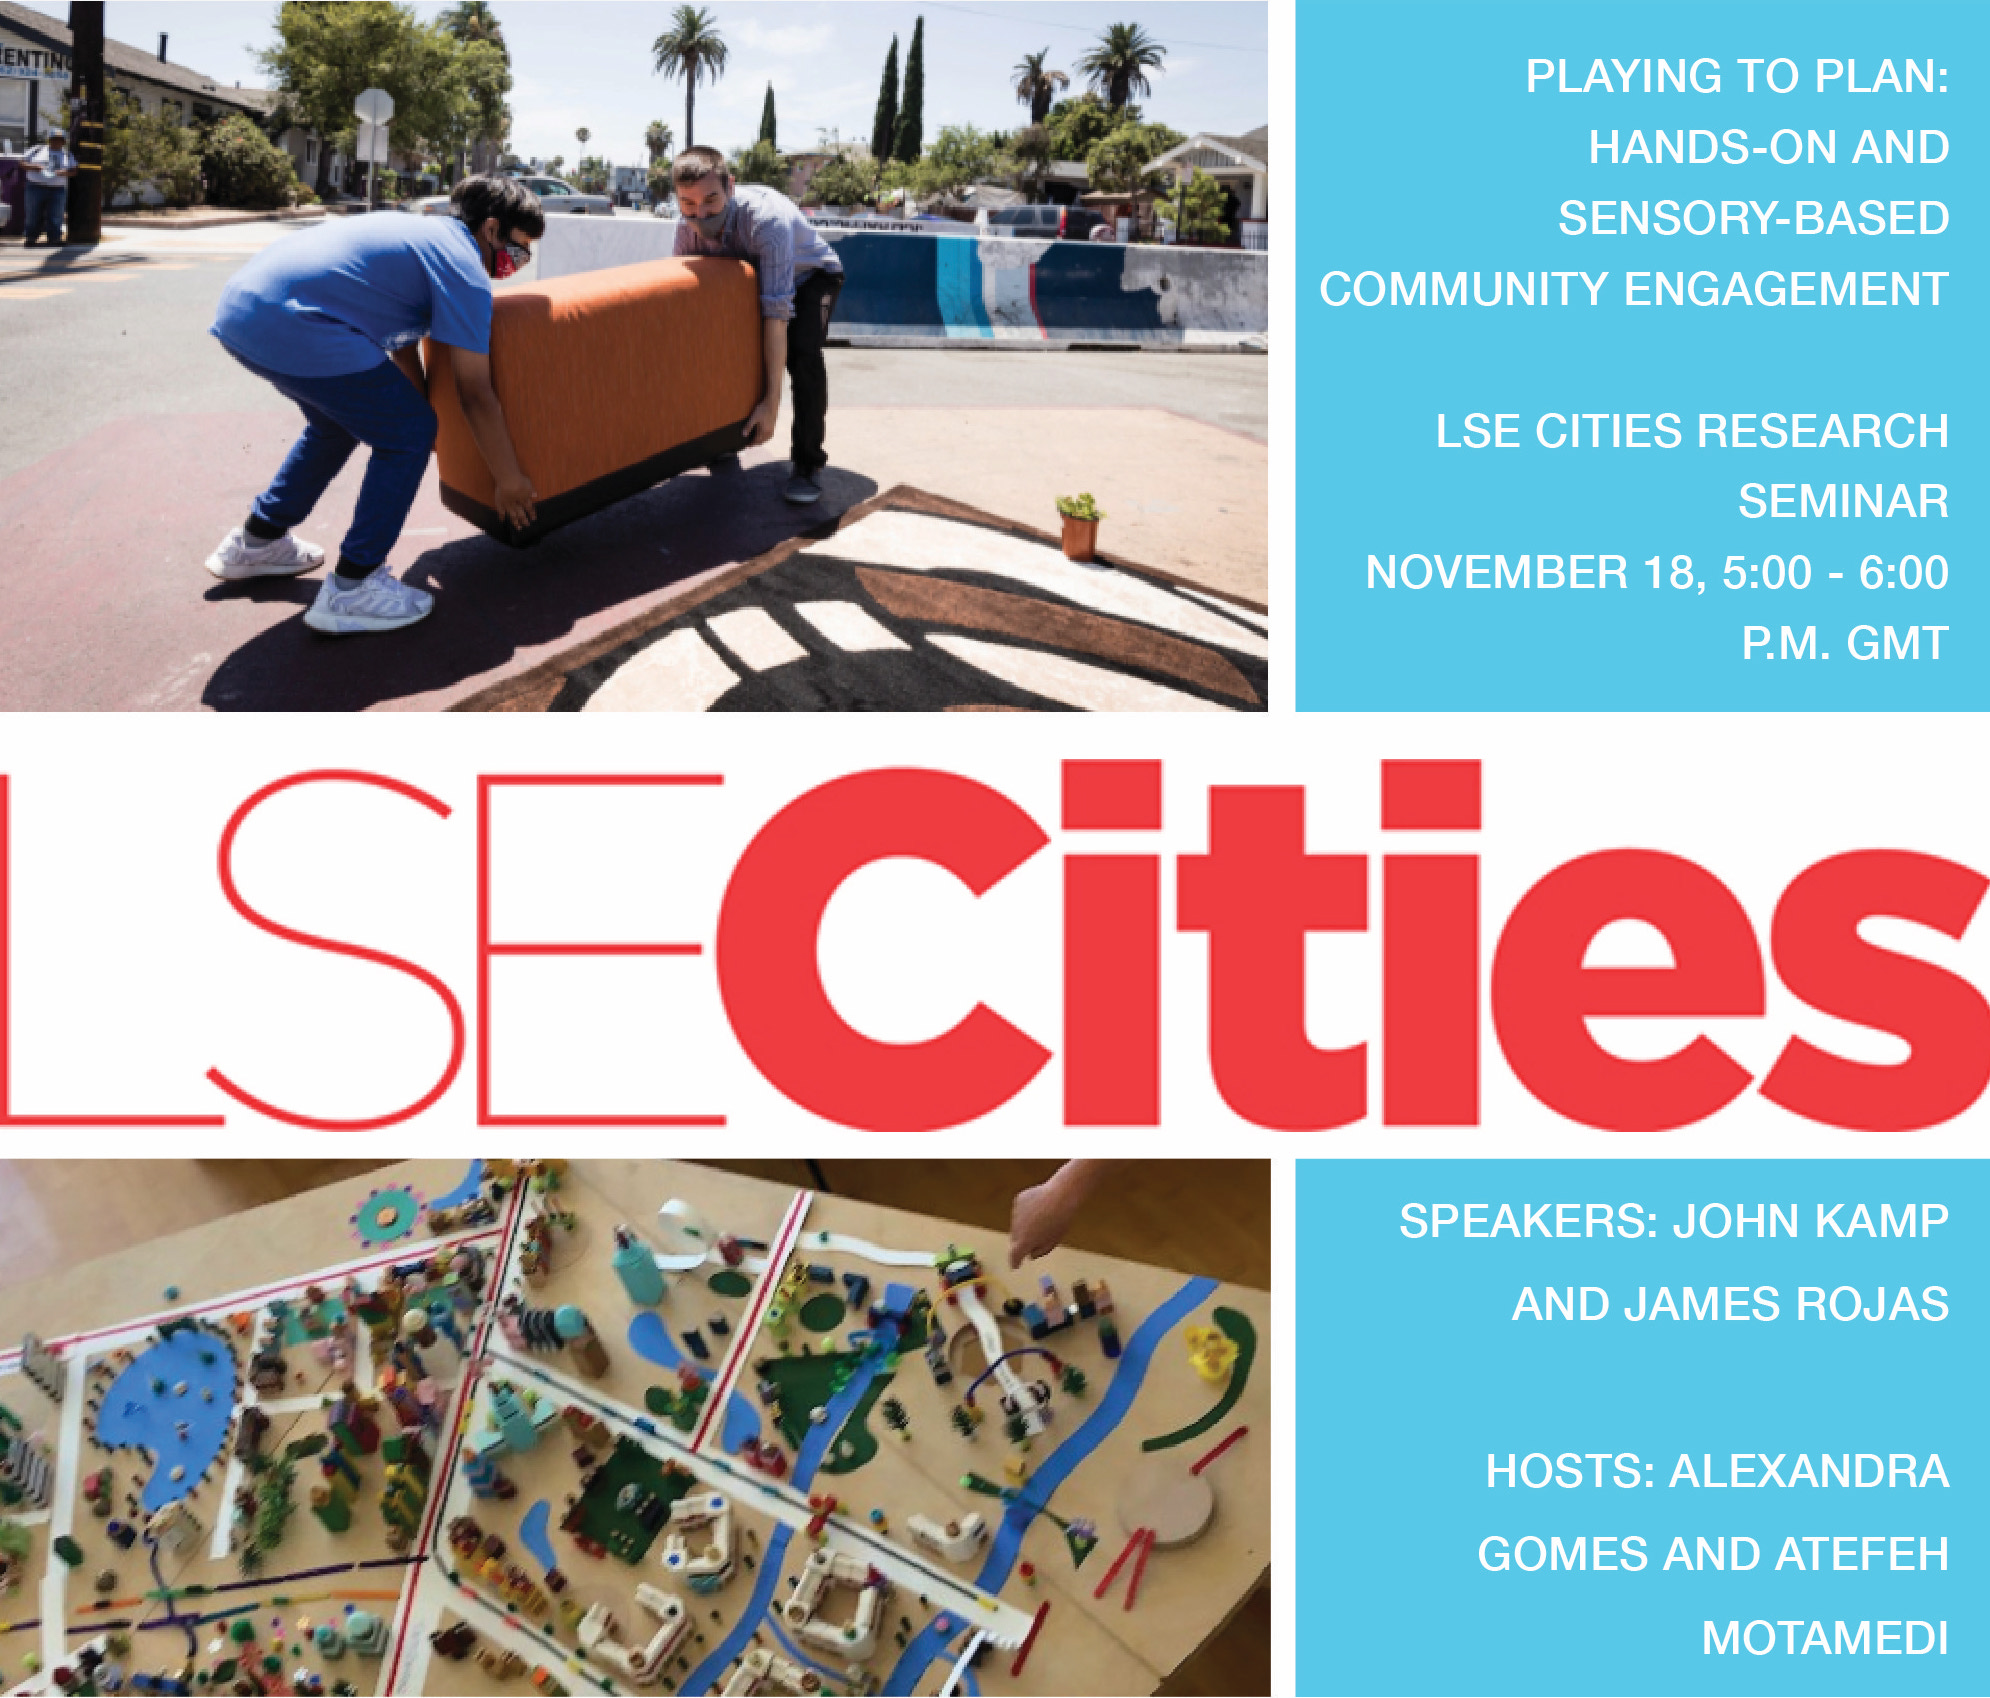 Flyer for an upcoming London School of Economics Cities Seminar featuring John Kamp and James Rojas talking about their hands-on engagement work.